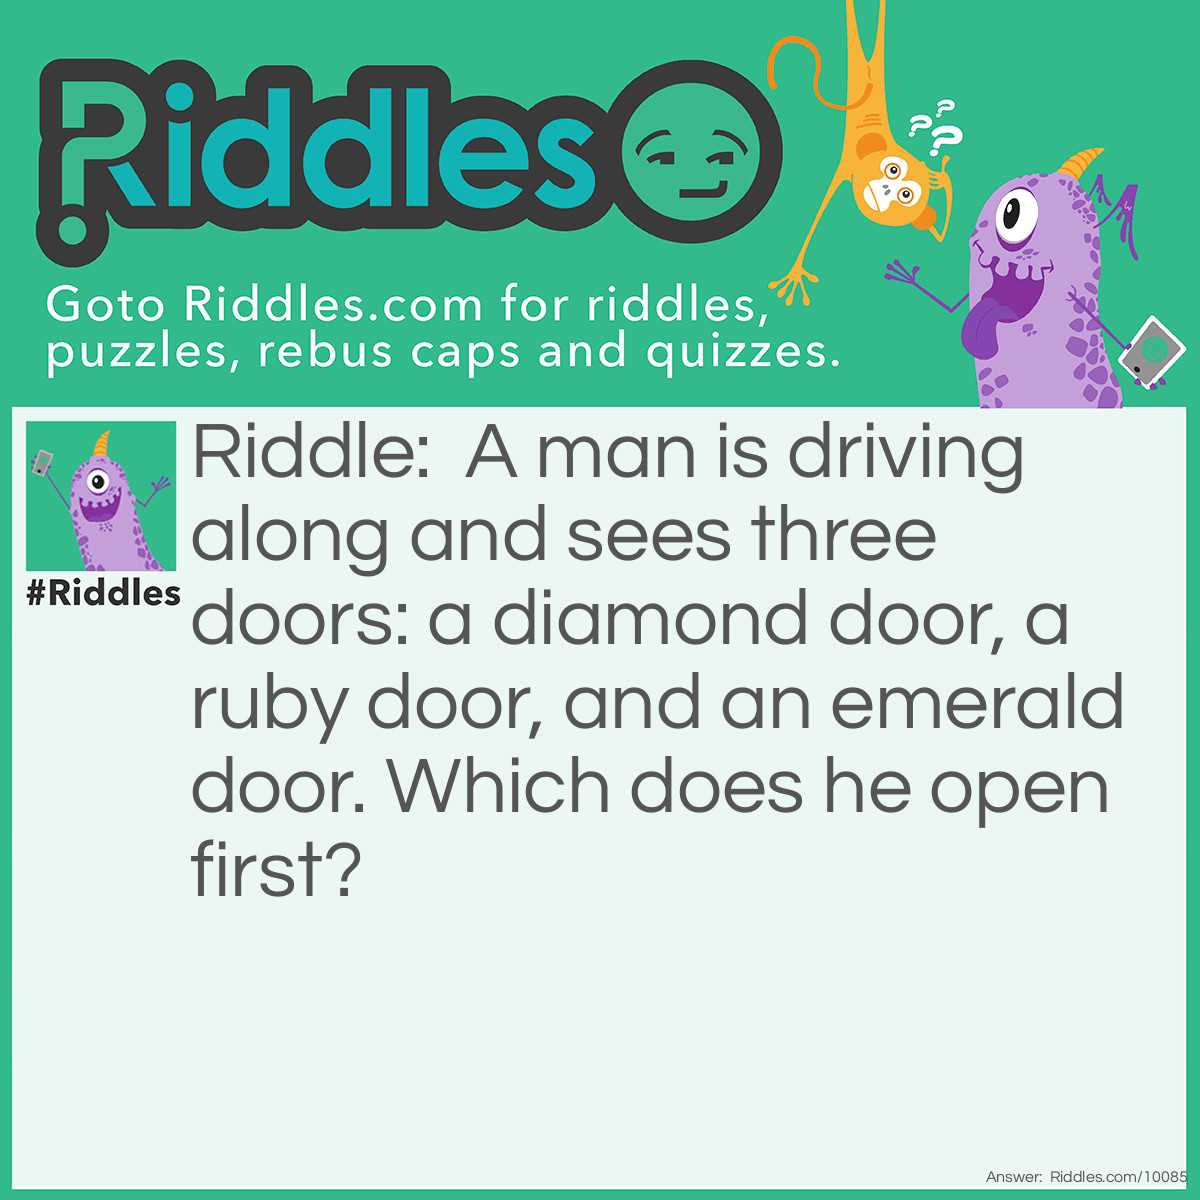 Riddle: A man is driving along and sees three doors: a diamond door, a ruby door, and an emerald door. Which does he open first? Answer: his car door